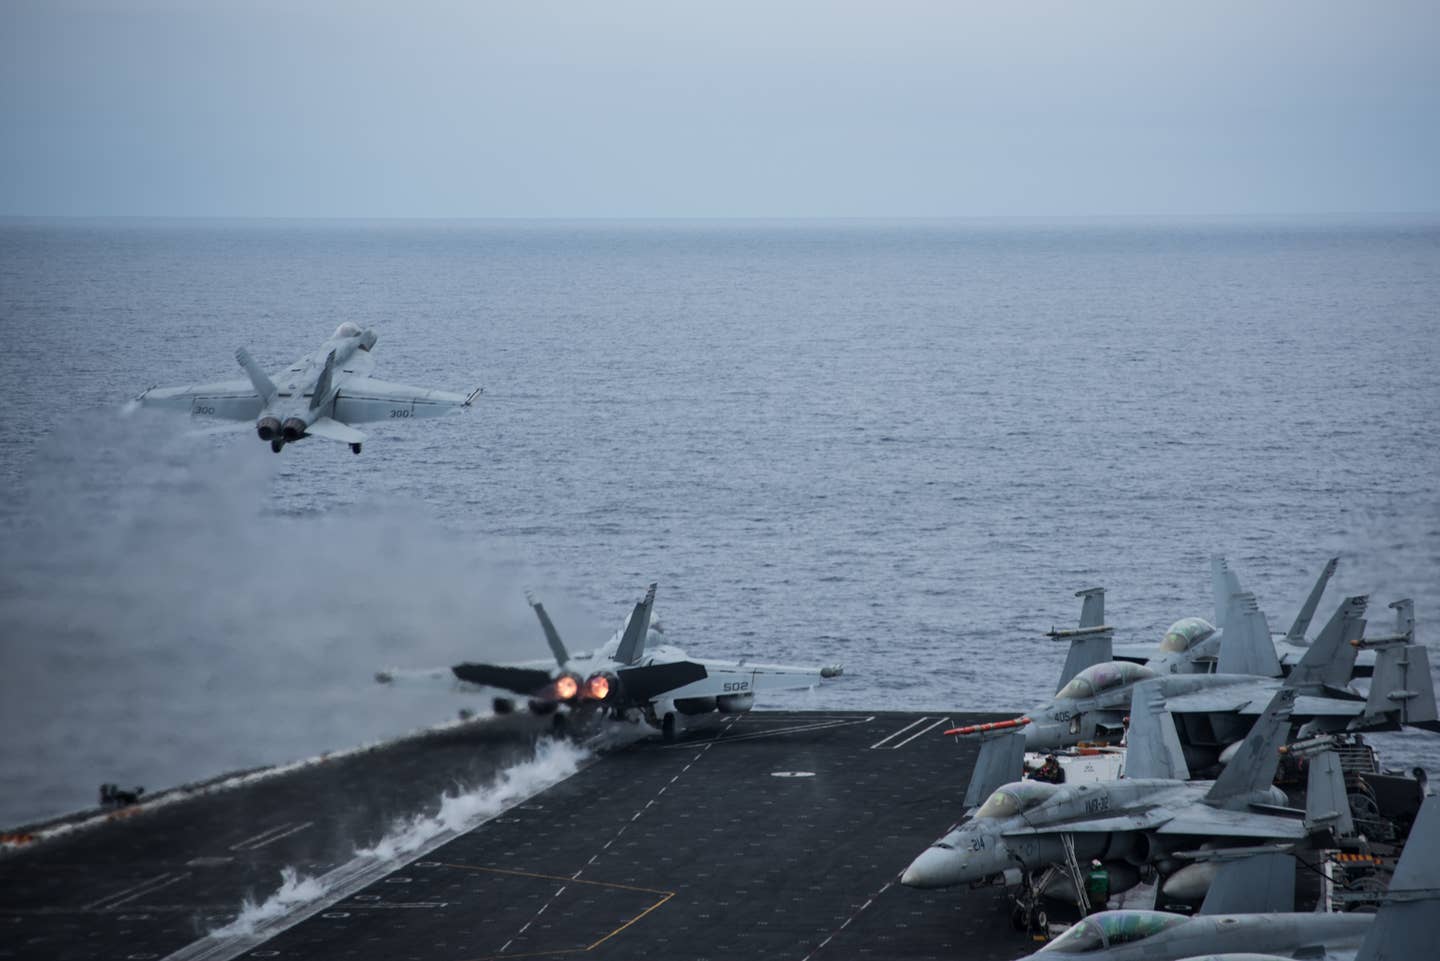 Two F/A-18 Super Hornets take off from the flight deck of the aircraft carrier USS <em>Theodore Roosevelt</em> during the COMPTUEX in the Pacific on August 19, 2017, three days before the crash of JEST 11. <em>U.S. Navy photo by Mass Communication Specialist 3rd Class Robyn B. Melvin/Released</em>